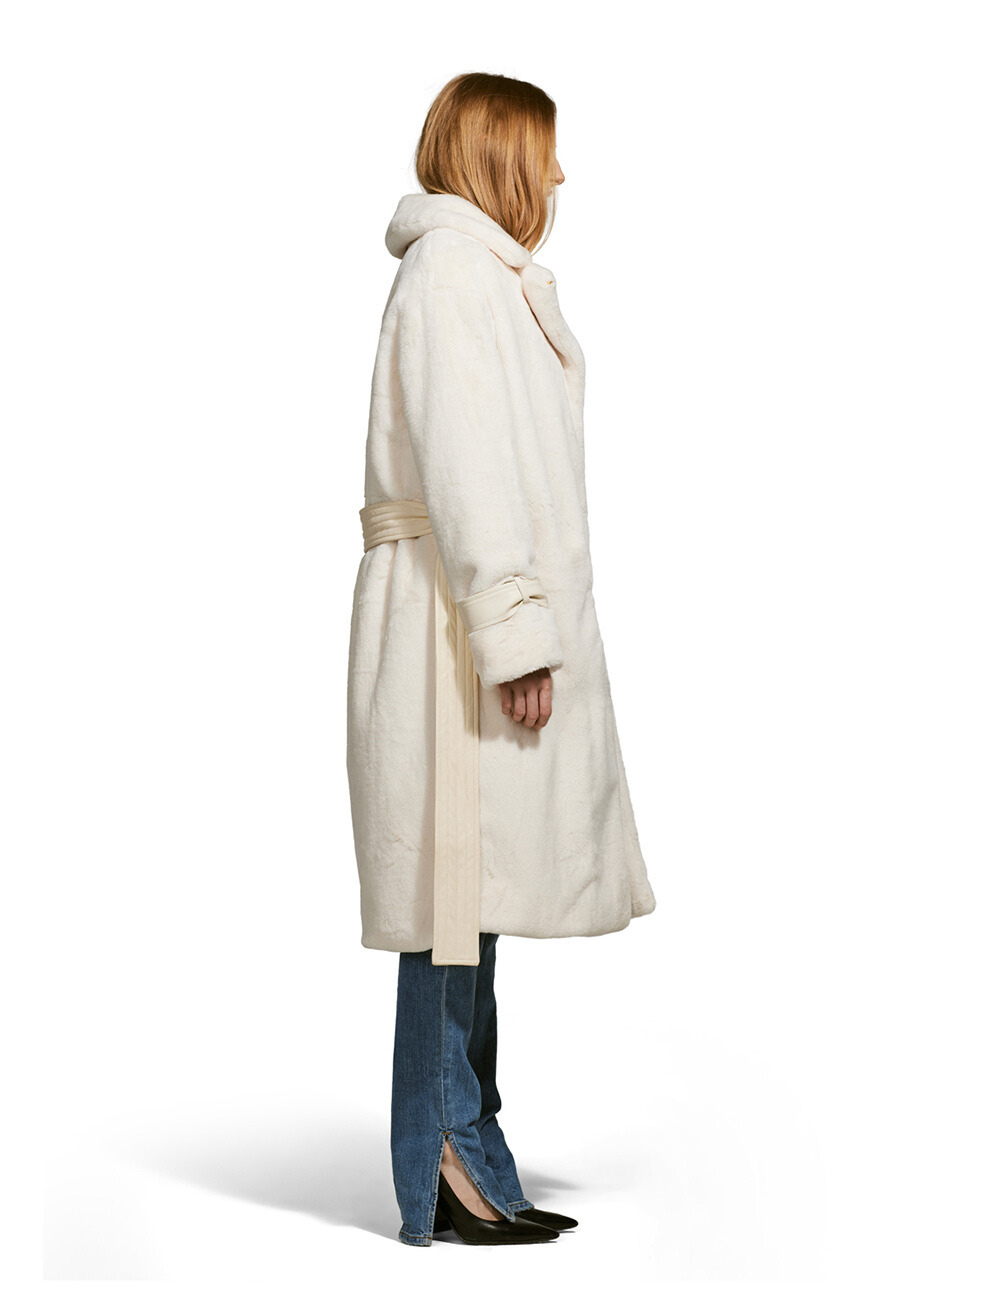 Violet White Cream Ethical Faux Fur Long Coat Cold Weather Made in Canada Vegan Leather